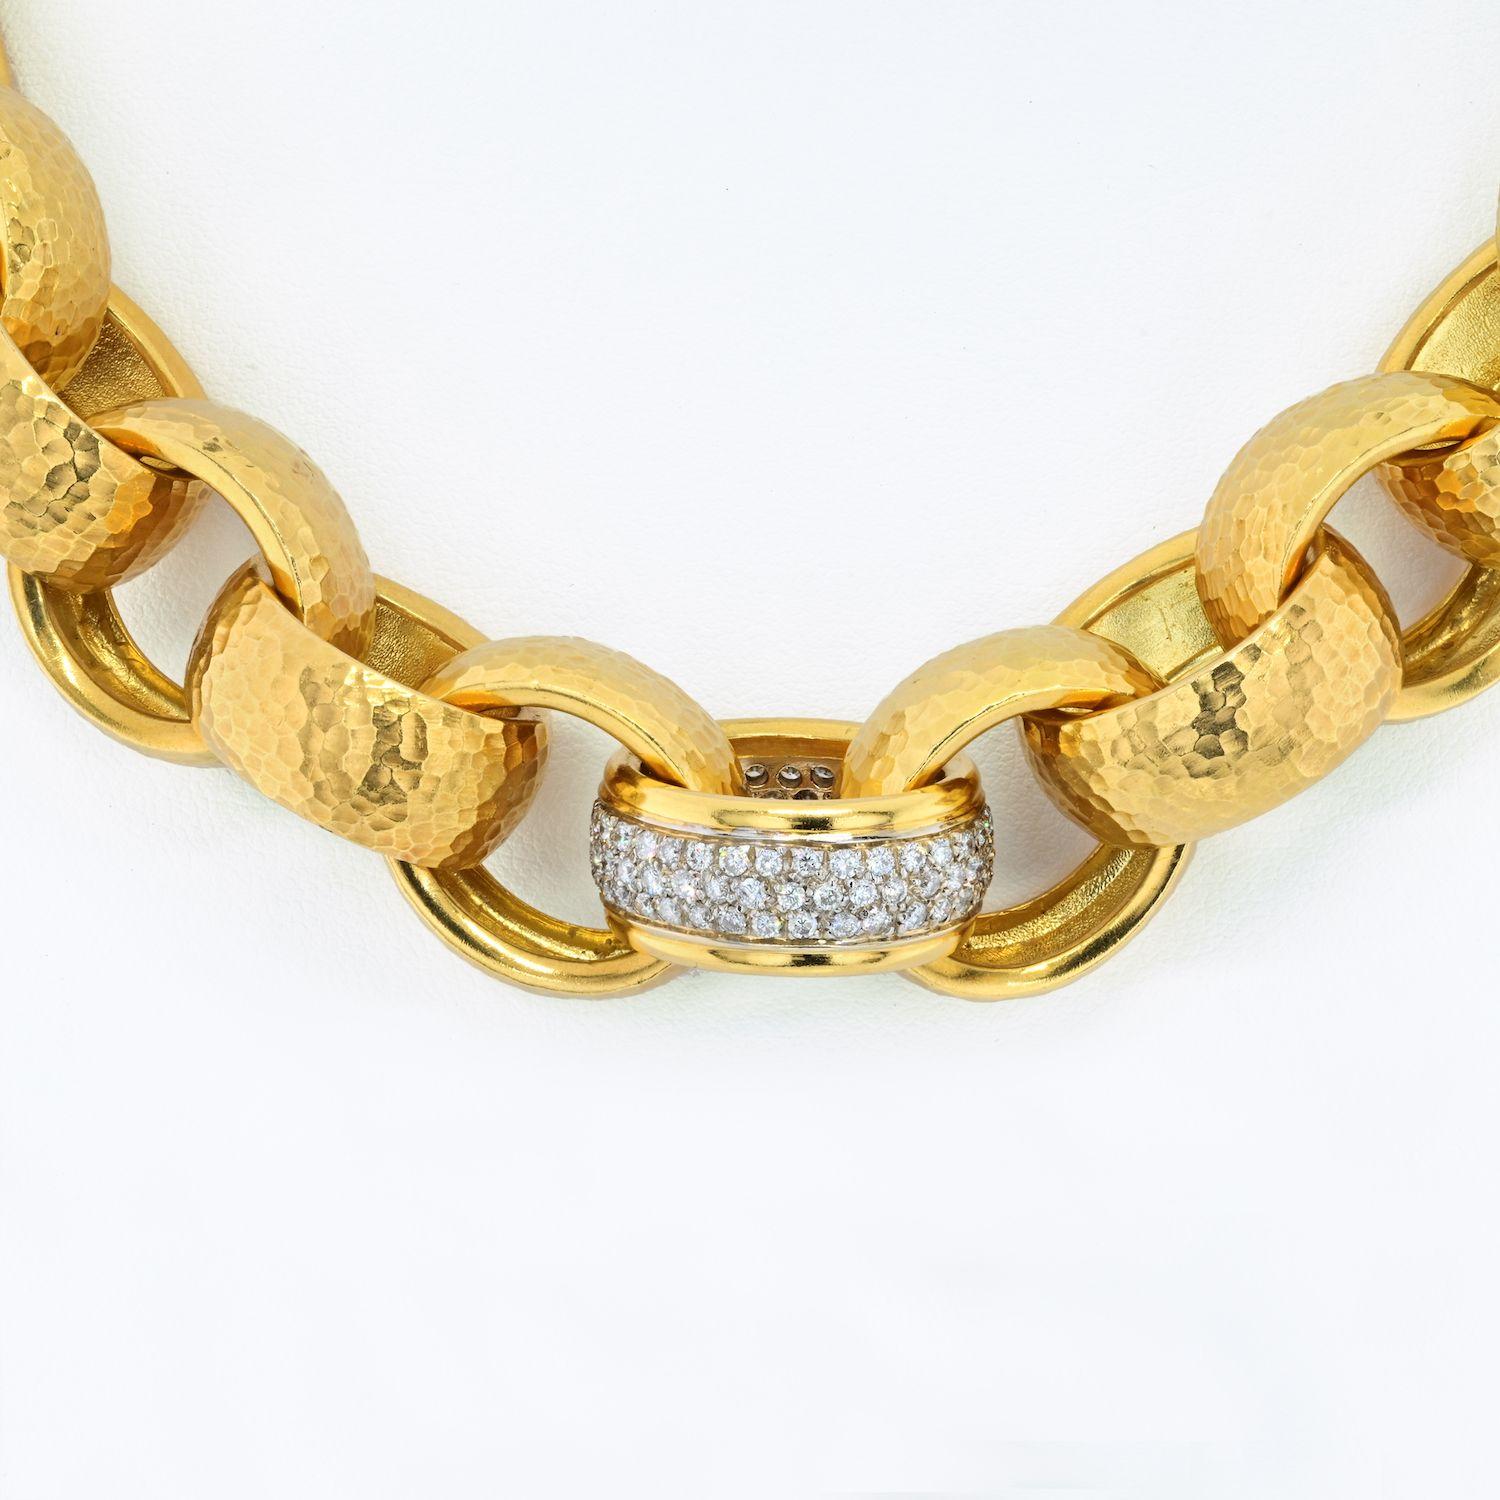 This is a bold 18K Yellow Gold Large Oversized Link Chain Necklace. Fabolous to wear over or under your favorite blouse. We are certain you will stop traffic and start a conersation with this hefty necklace on. 
It lays right on the collar bone